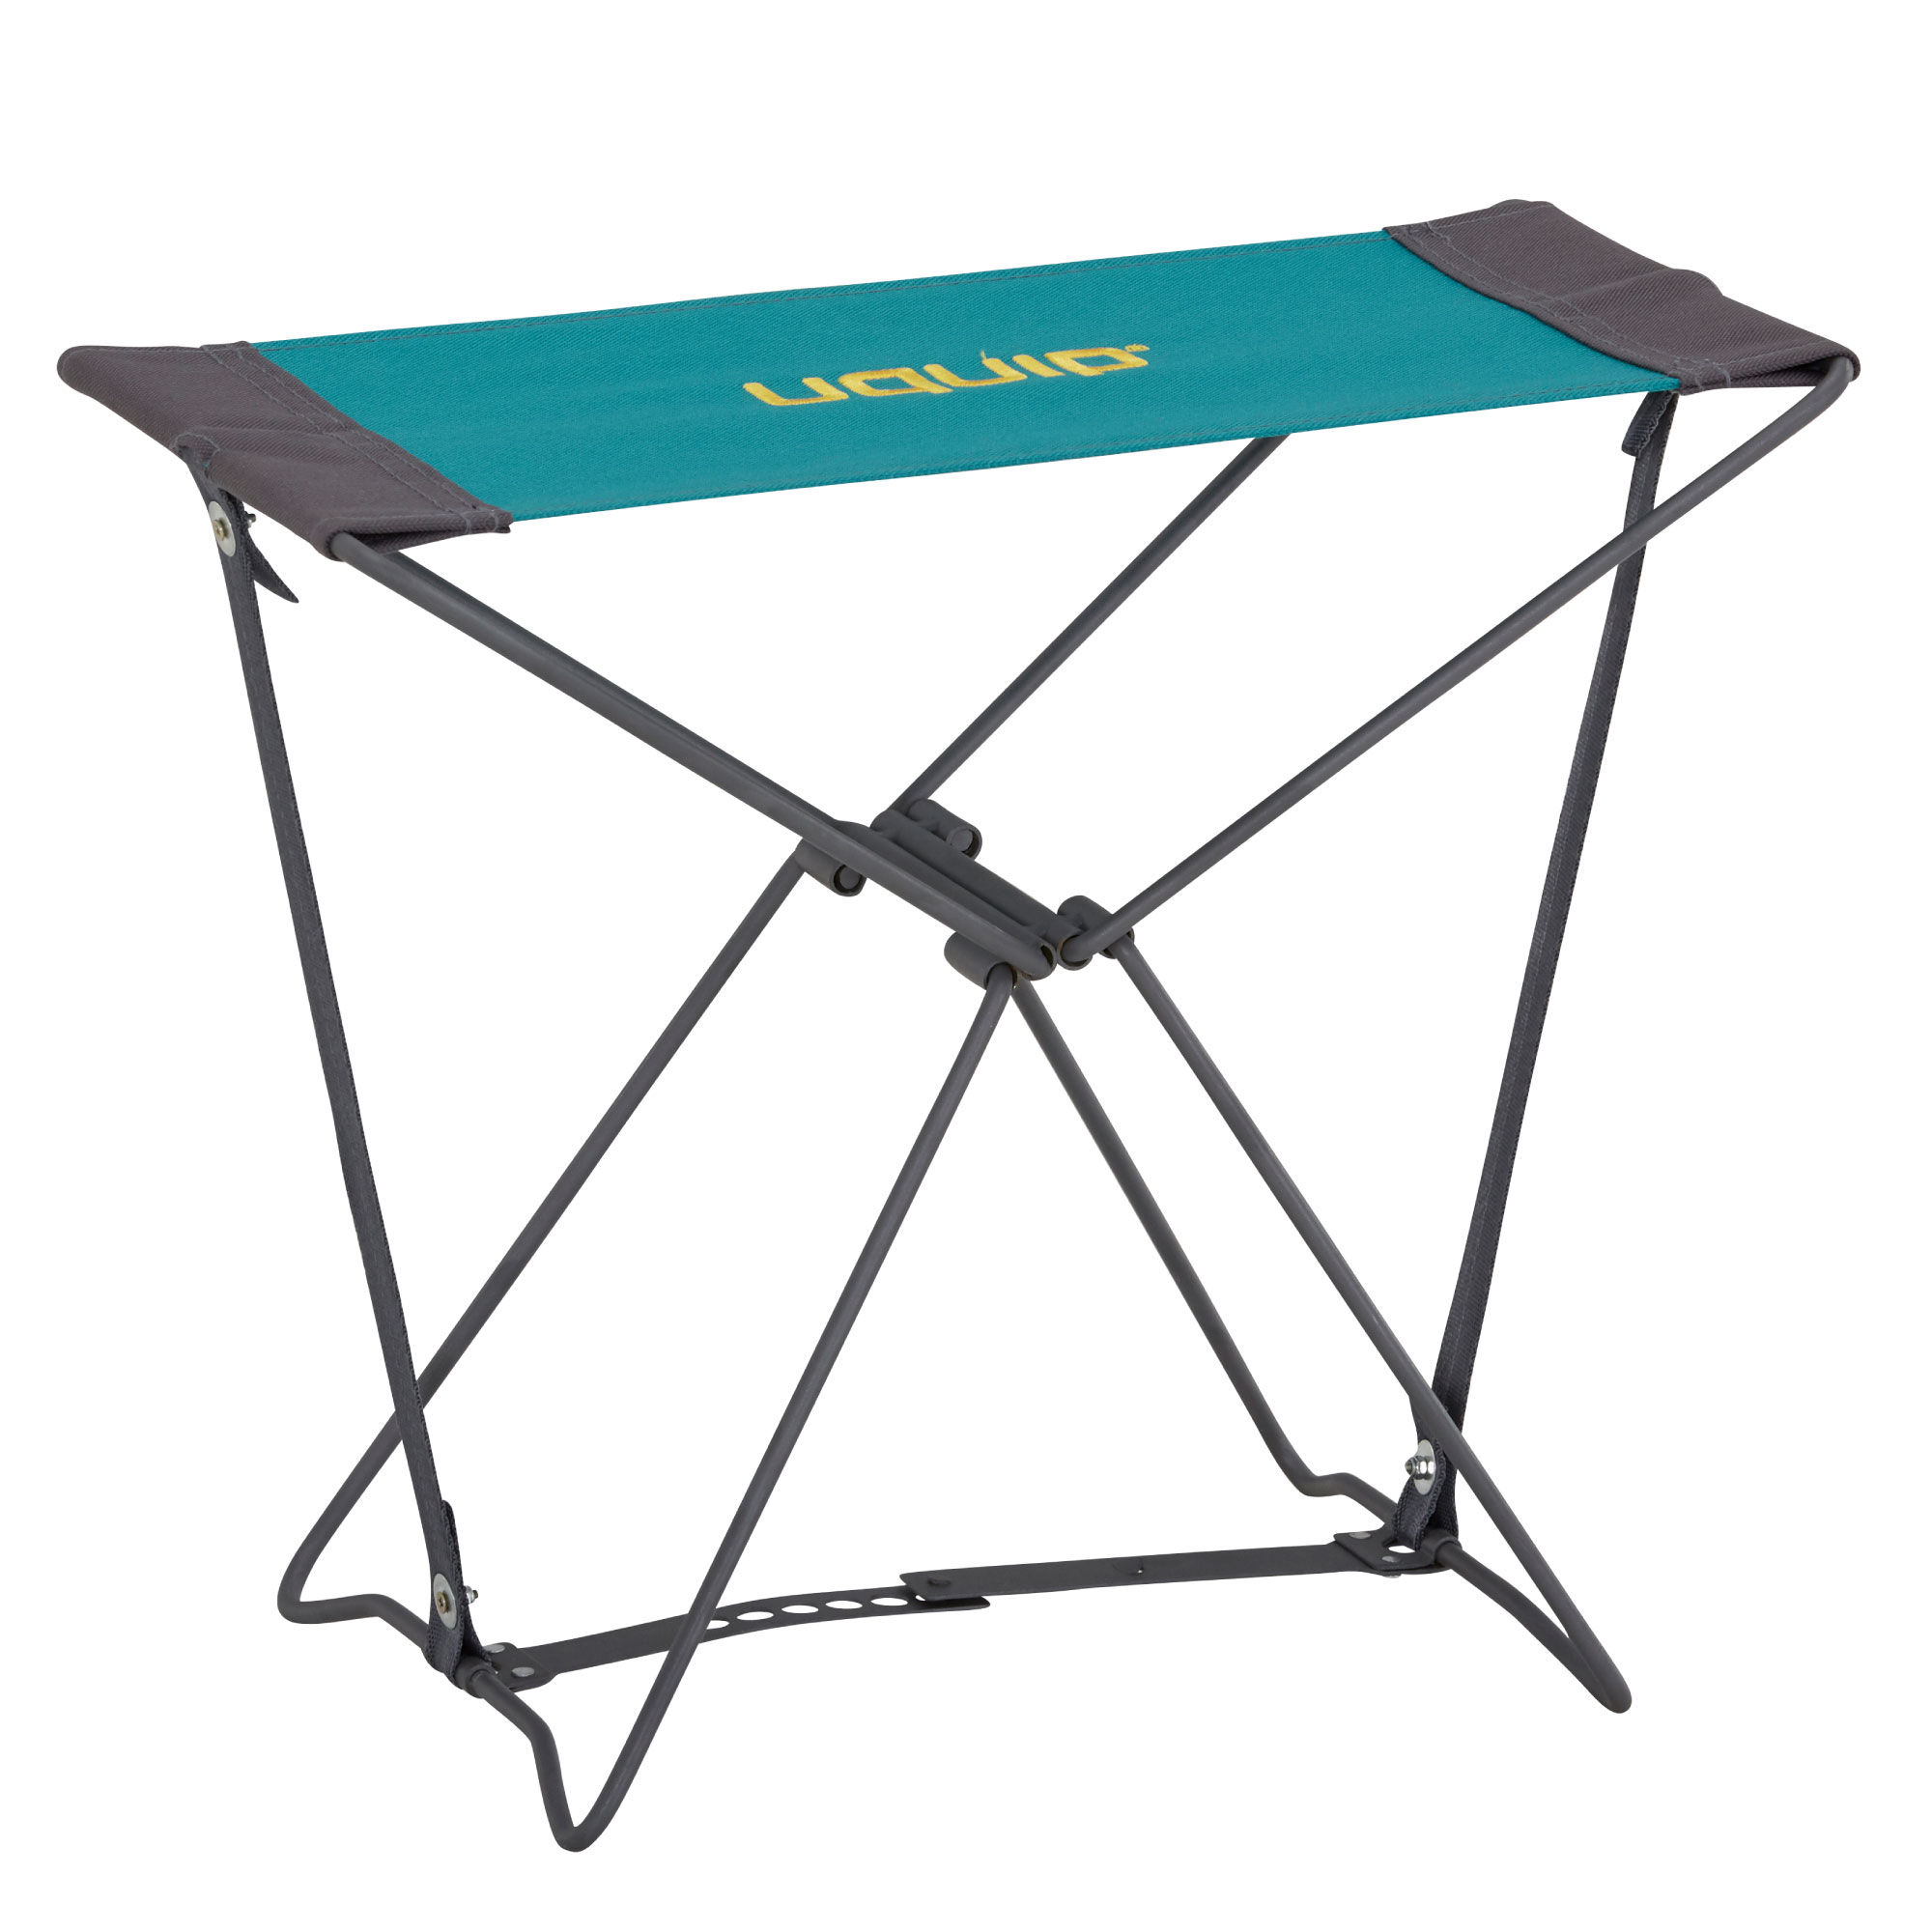 Uquip Fancy Portable Folding Stool for Camping and Sports Grey Petrol Blue 